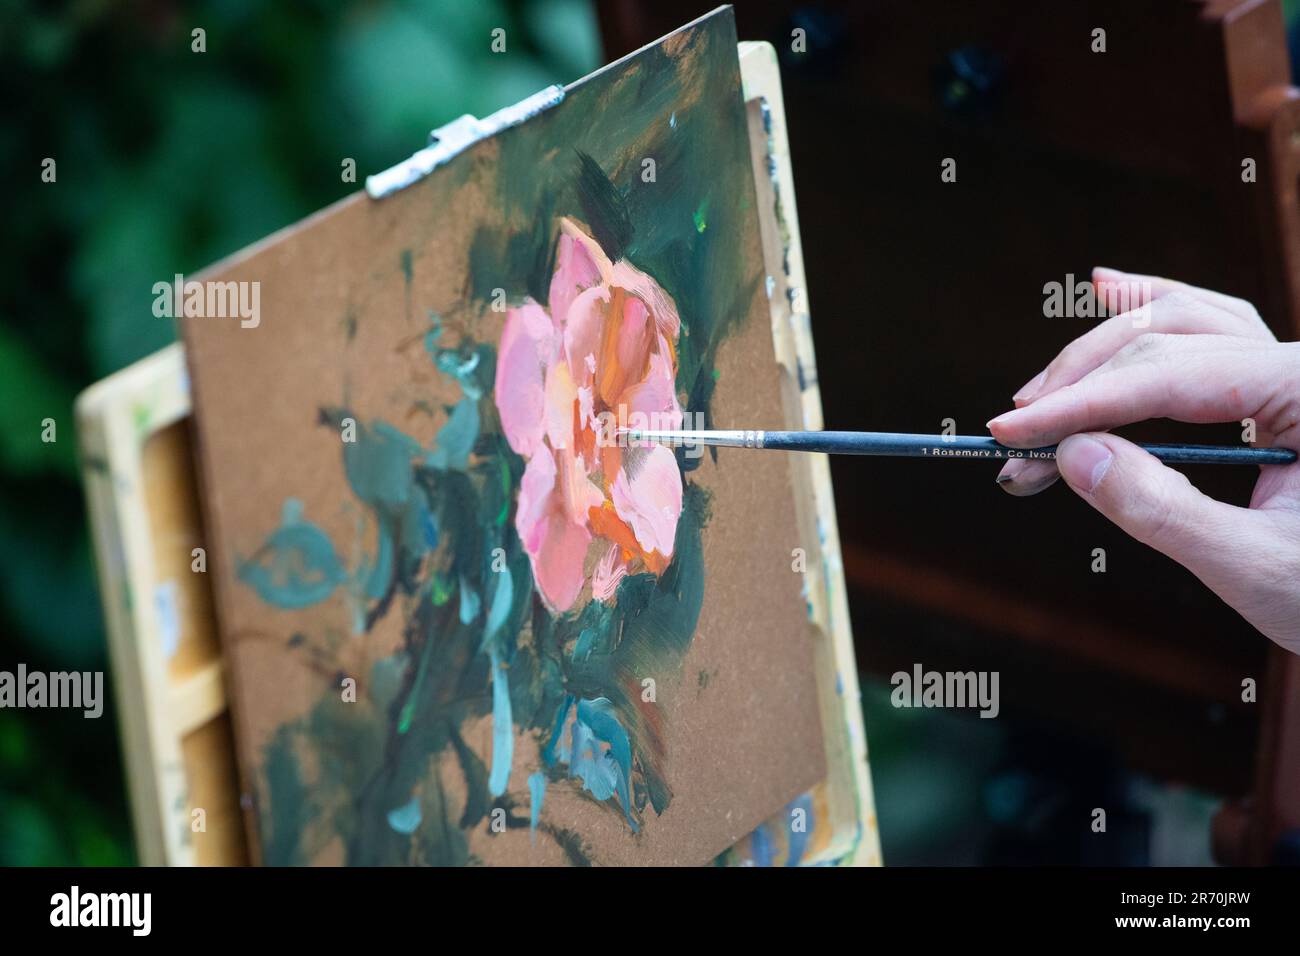 A painter hand holding a brush to paint a flower. Stock Photo